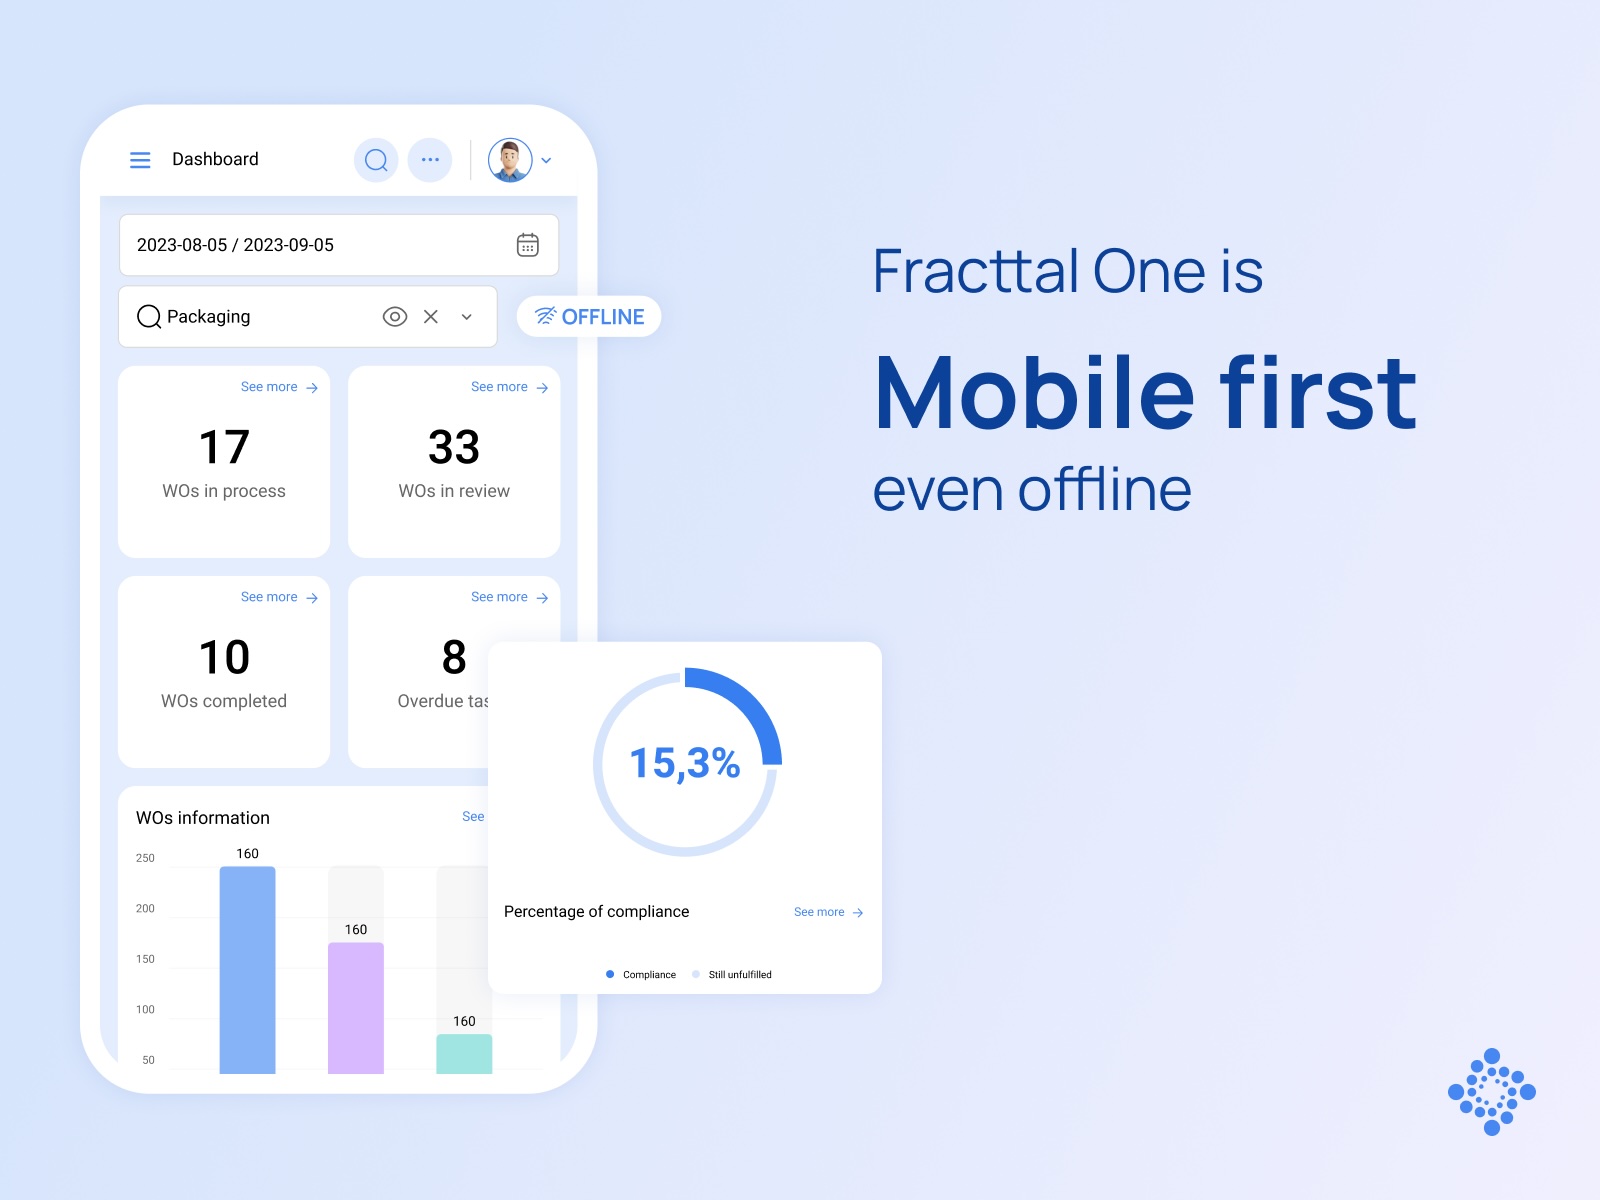 Fracttal One is Mobile first even offline.